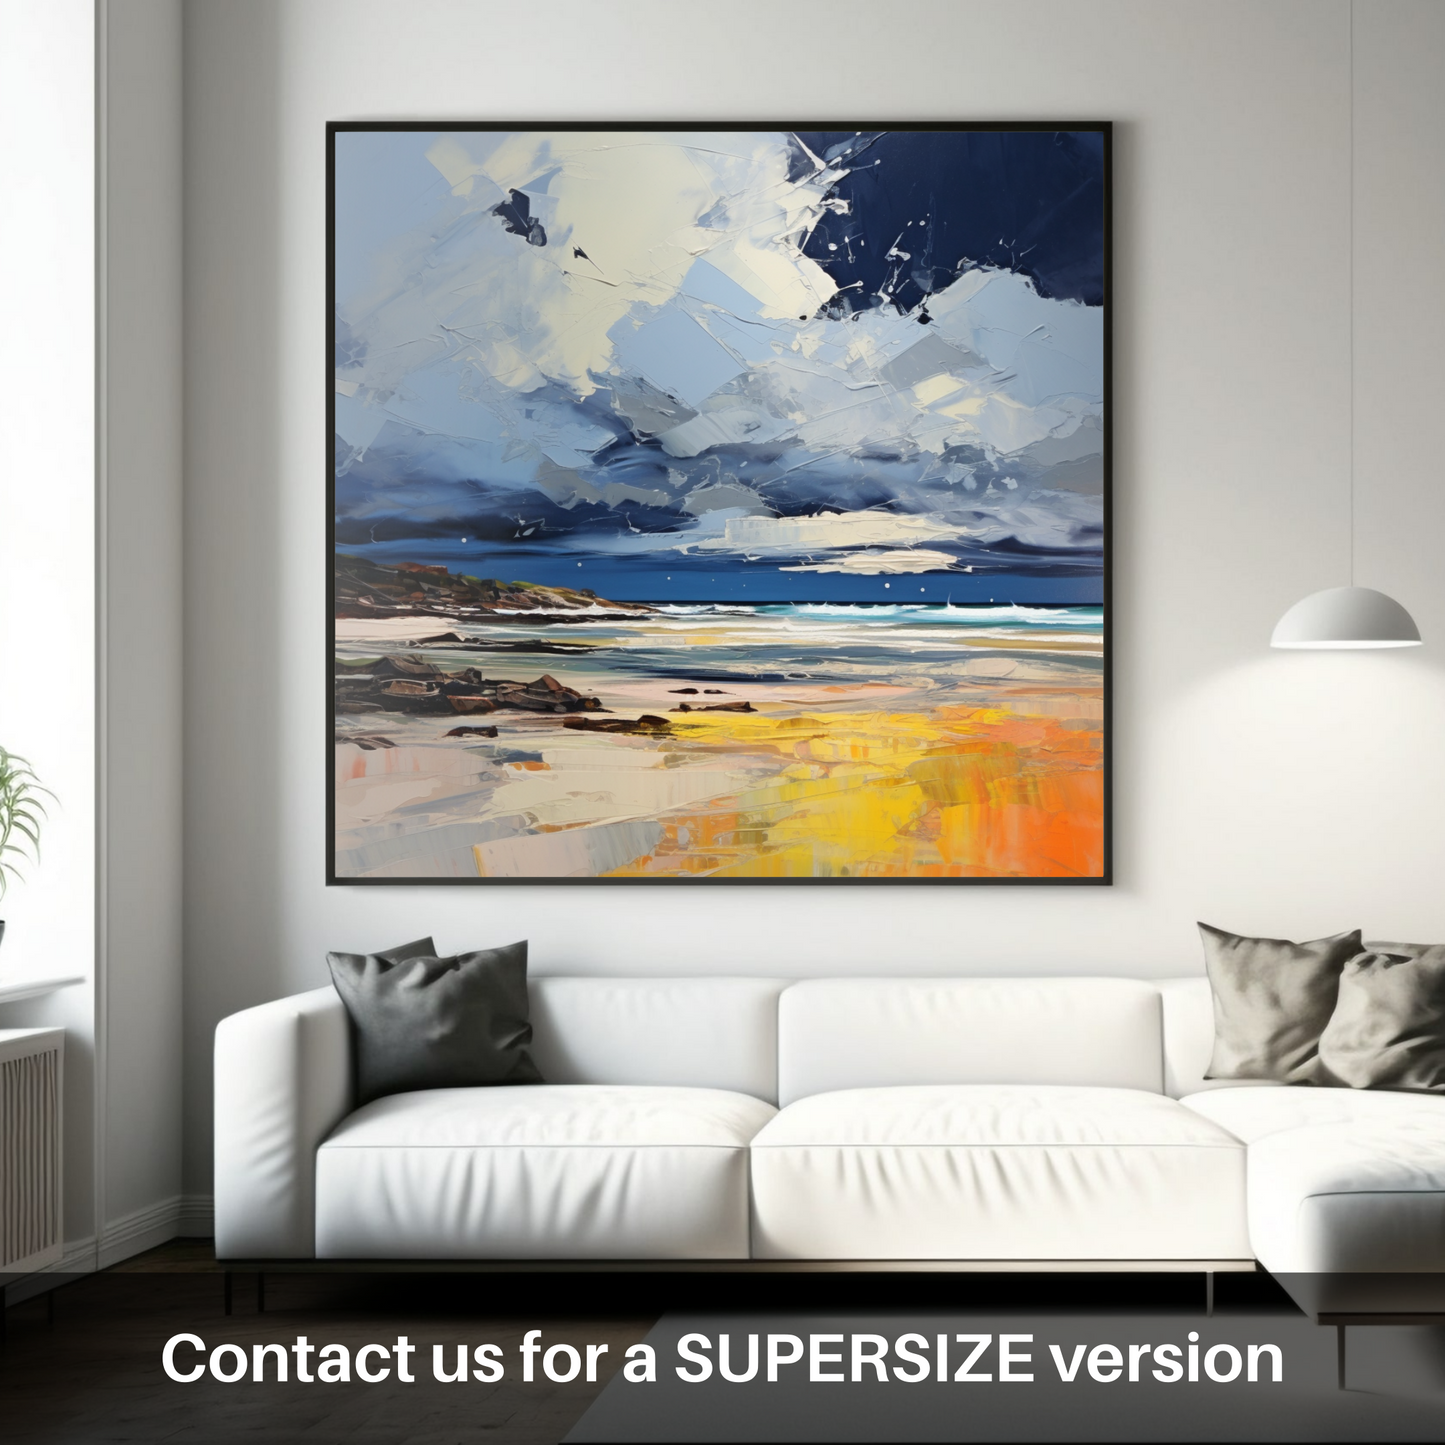 Huge supersize print of West Sands with a stormy sky